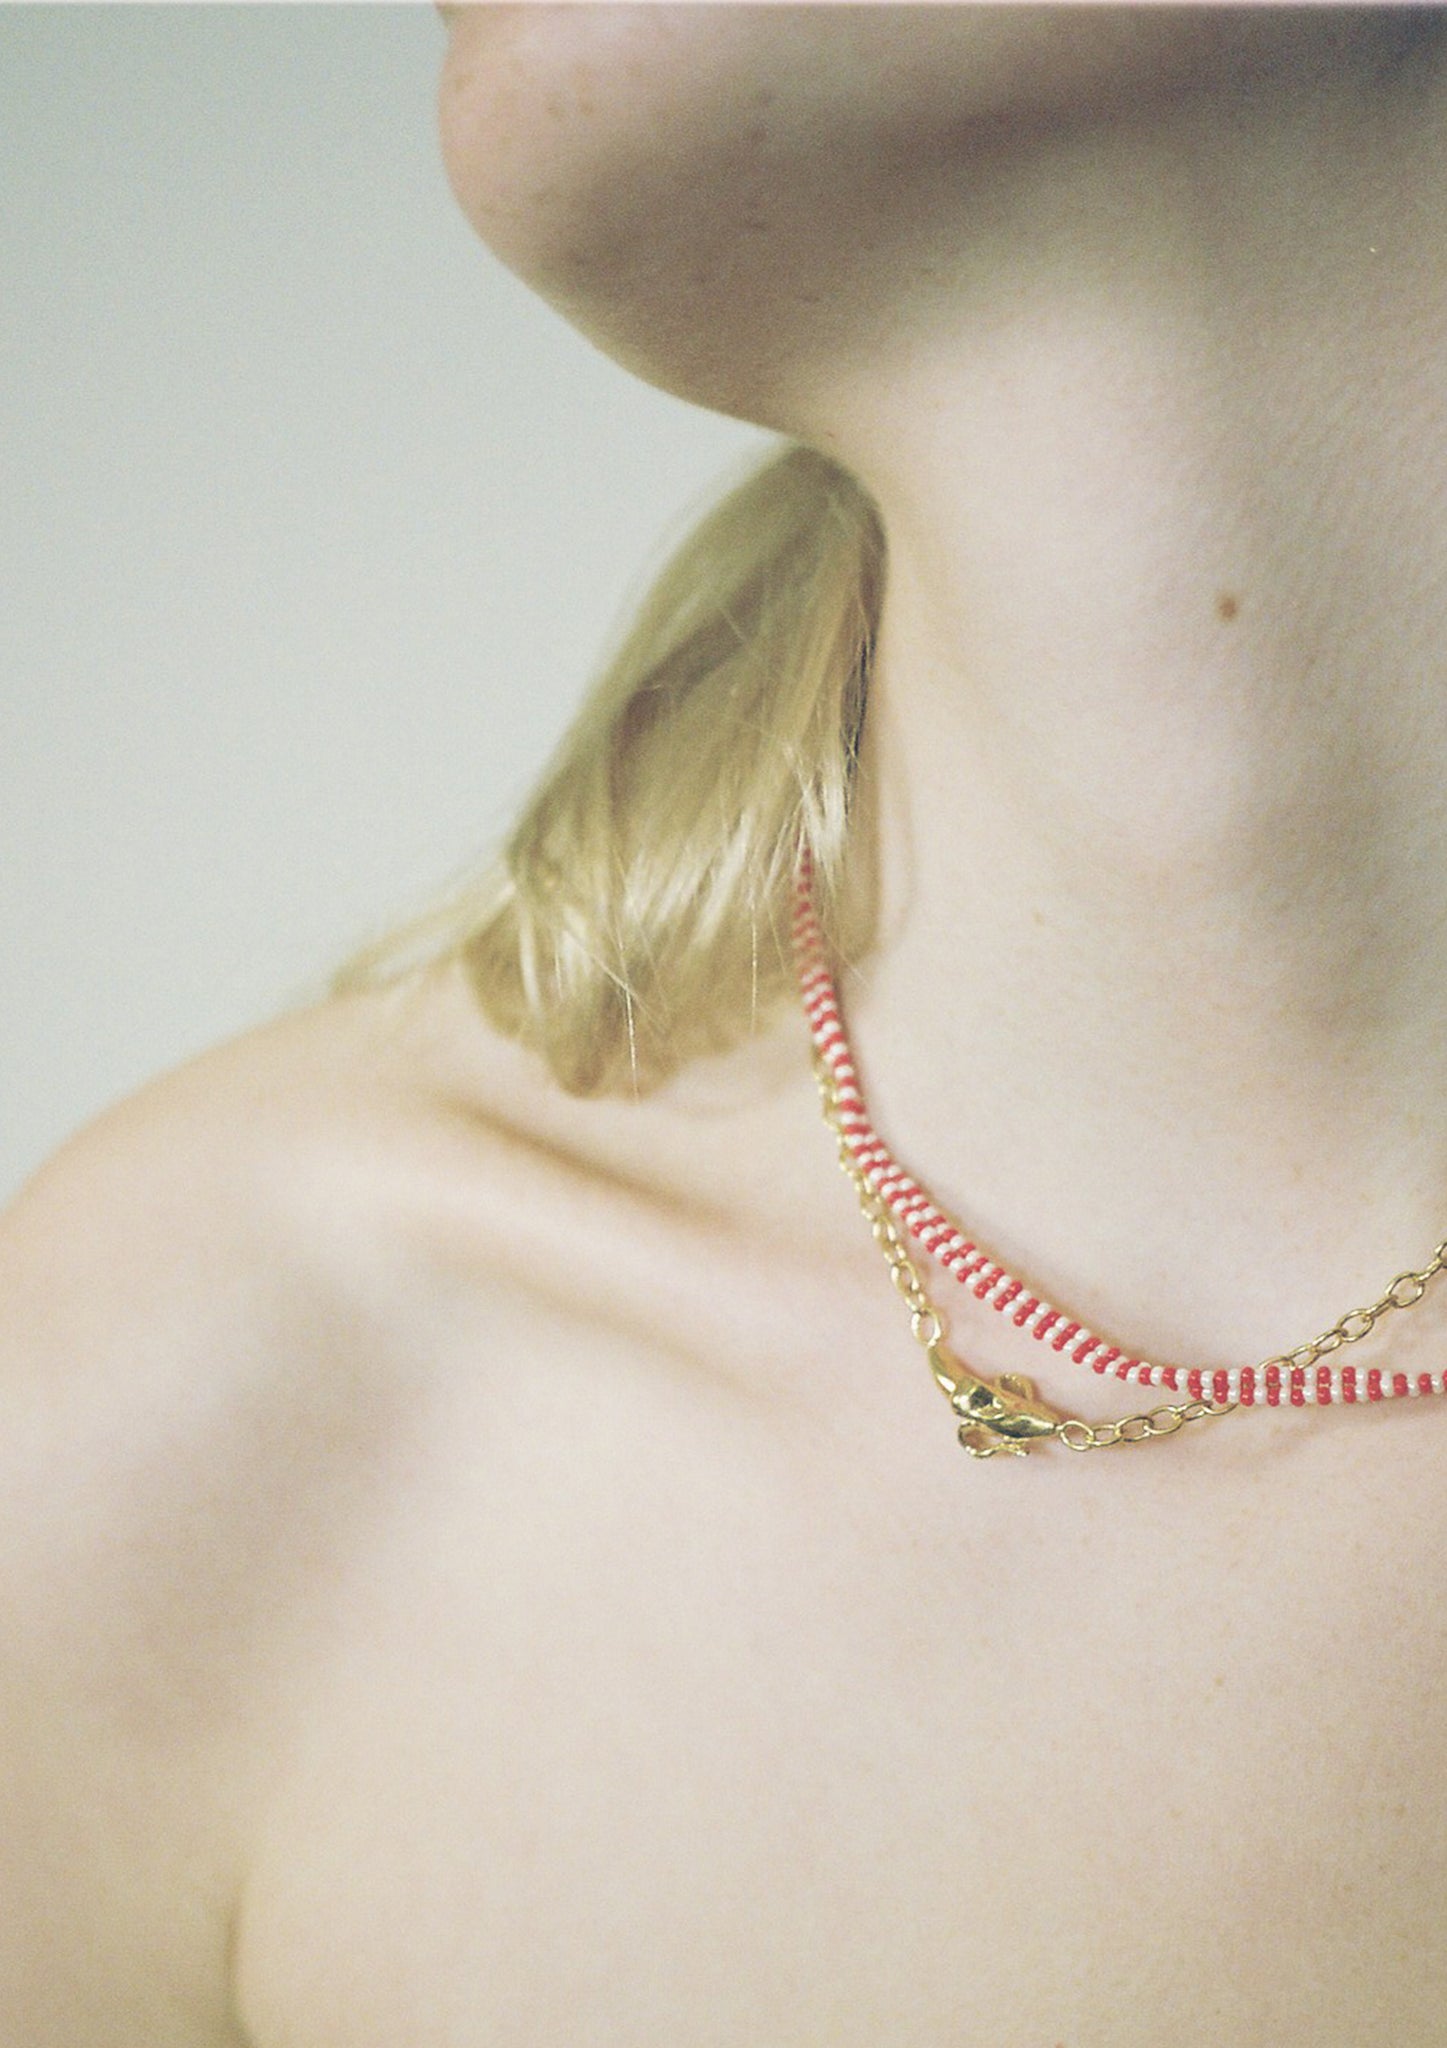 Red Double Necklace